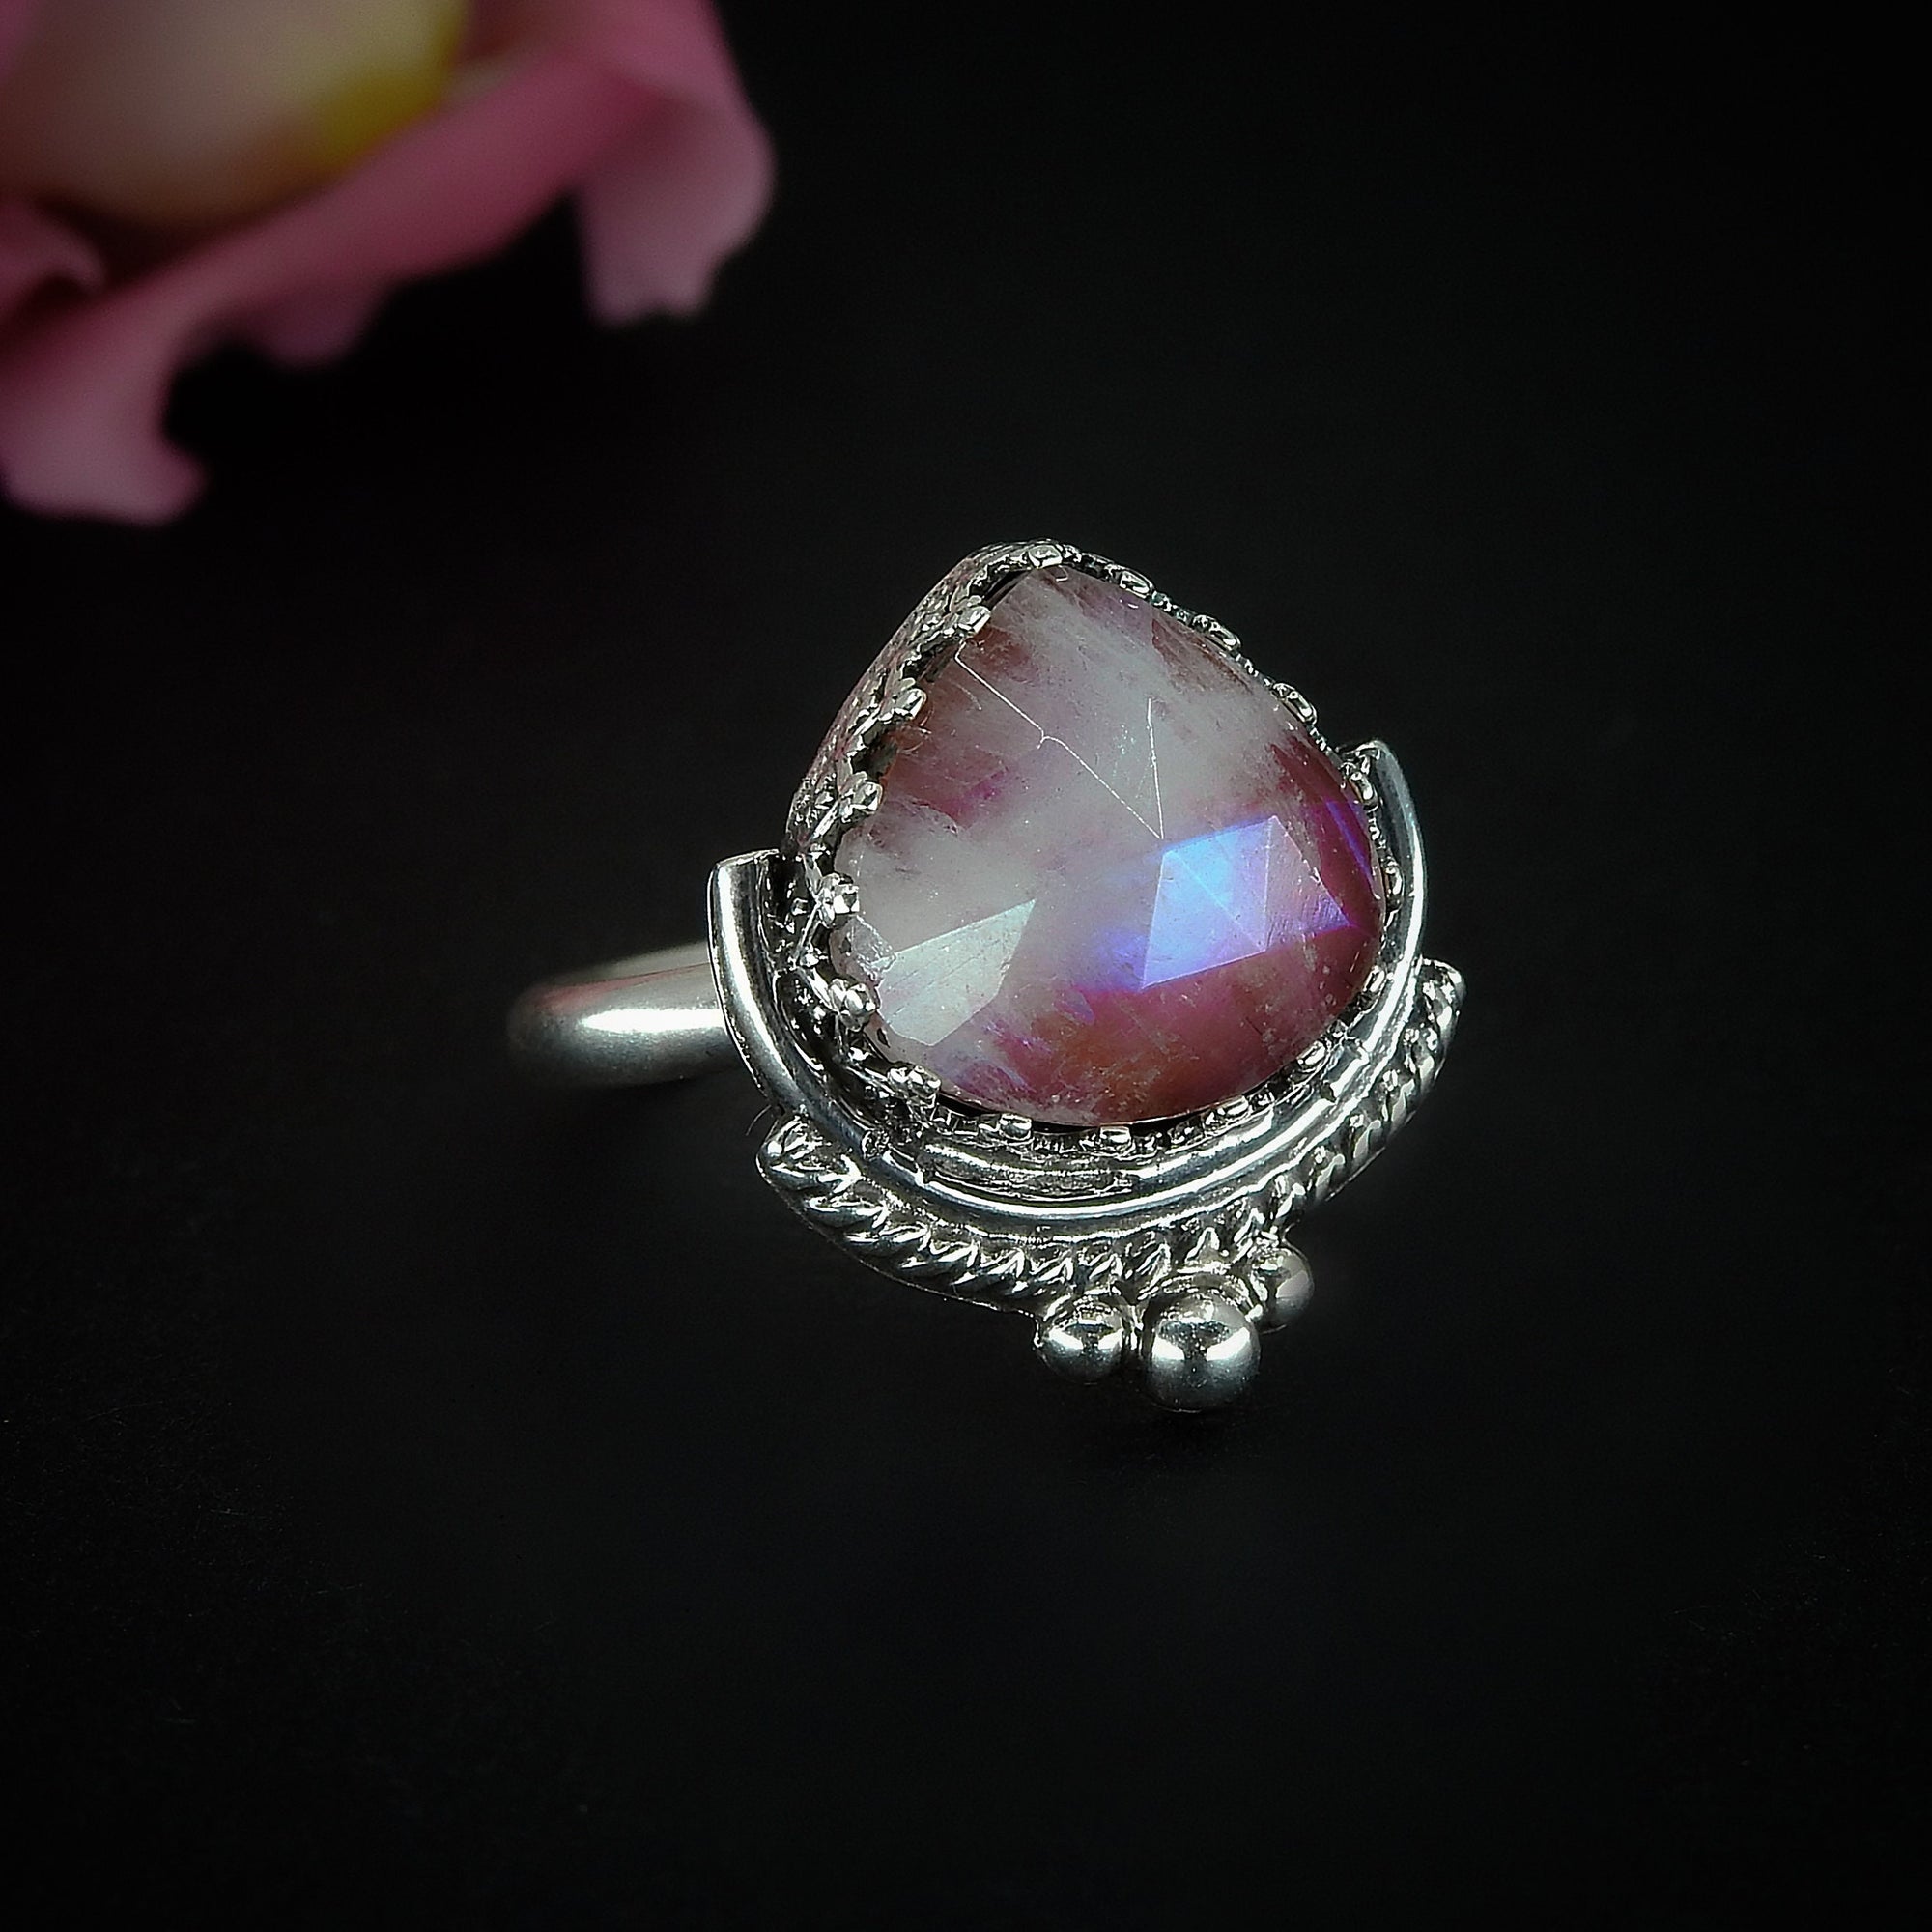 Rose Cut Moonstone & Red Jasper Ring - Size 6 1/4 to 6 1/2 